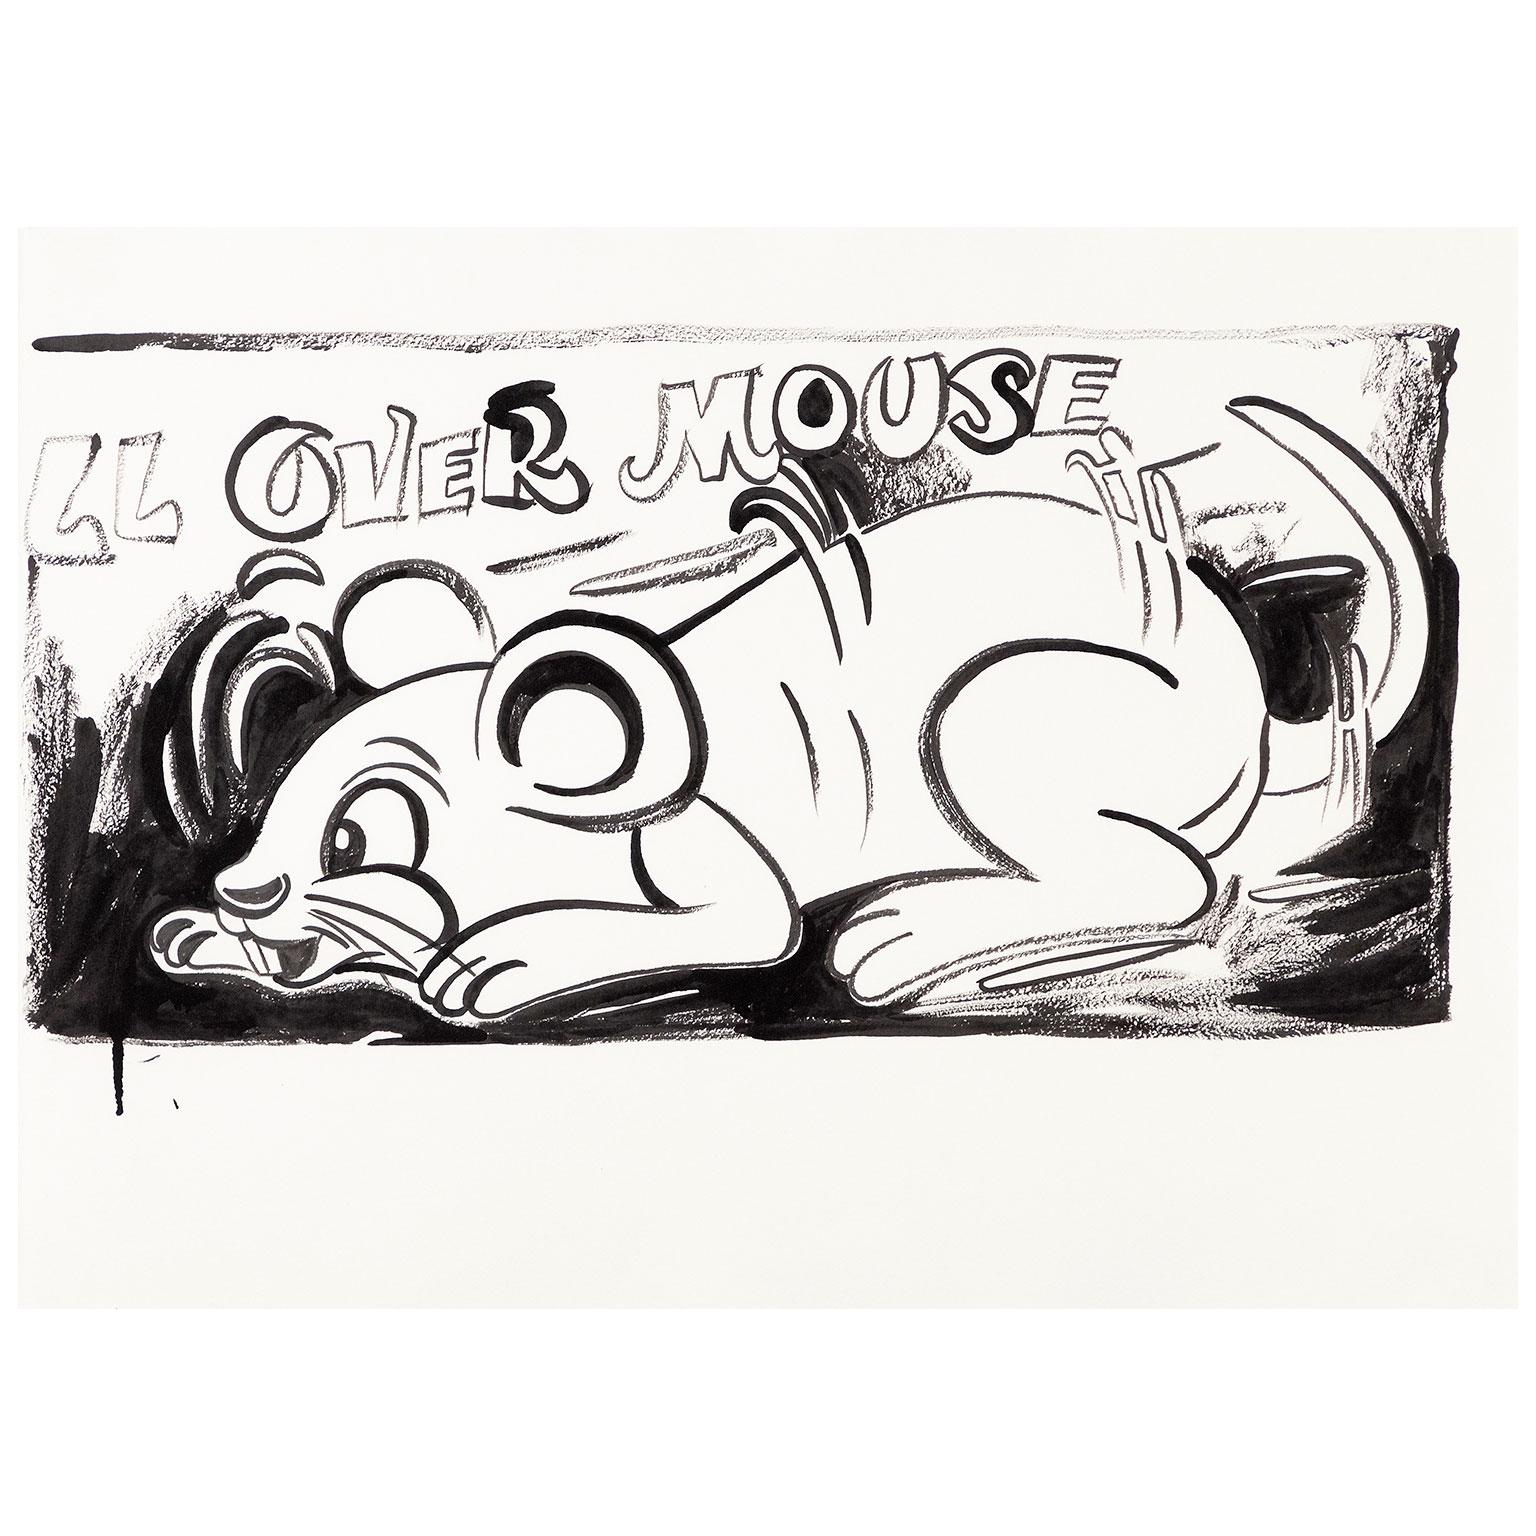 Roll Over Mouse - American Modern Painting by Andy Warhol